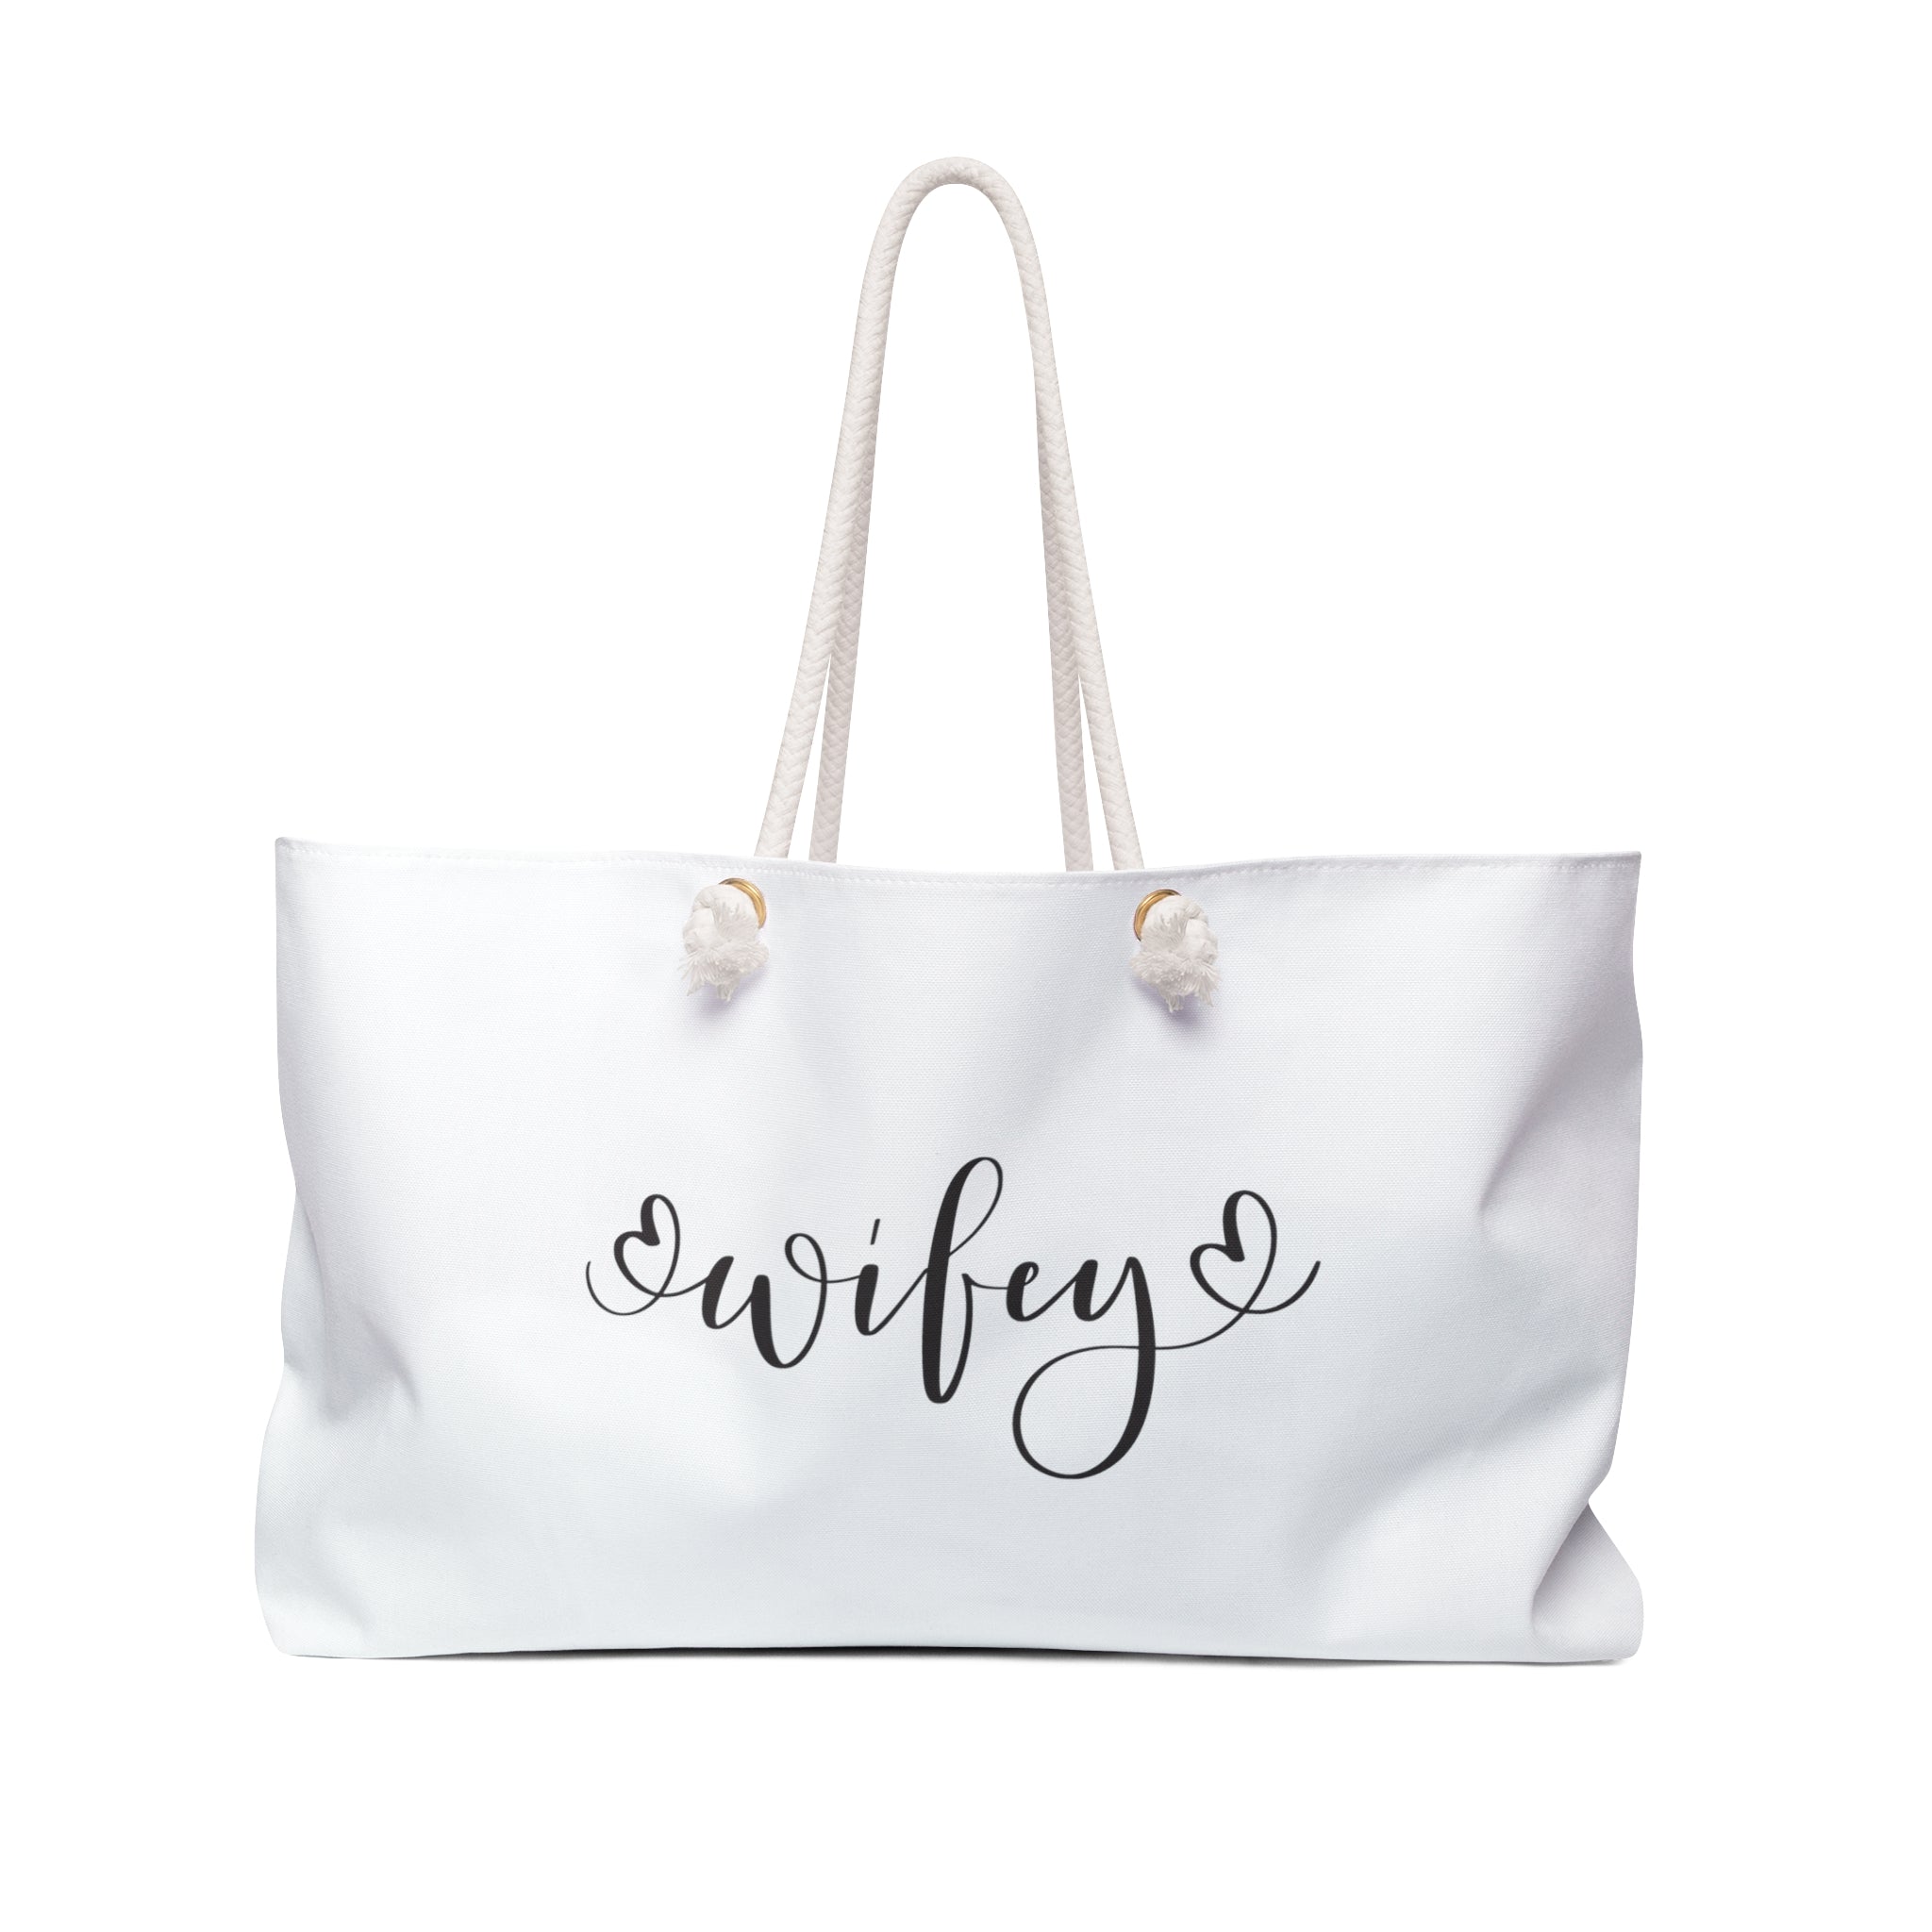 Wifey Weekender Bag! Perfect gift for wives!